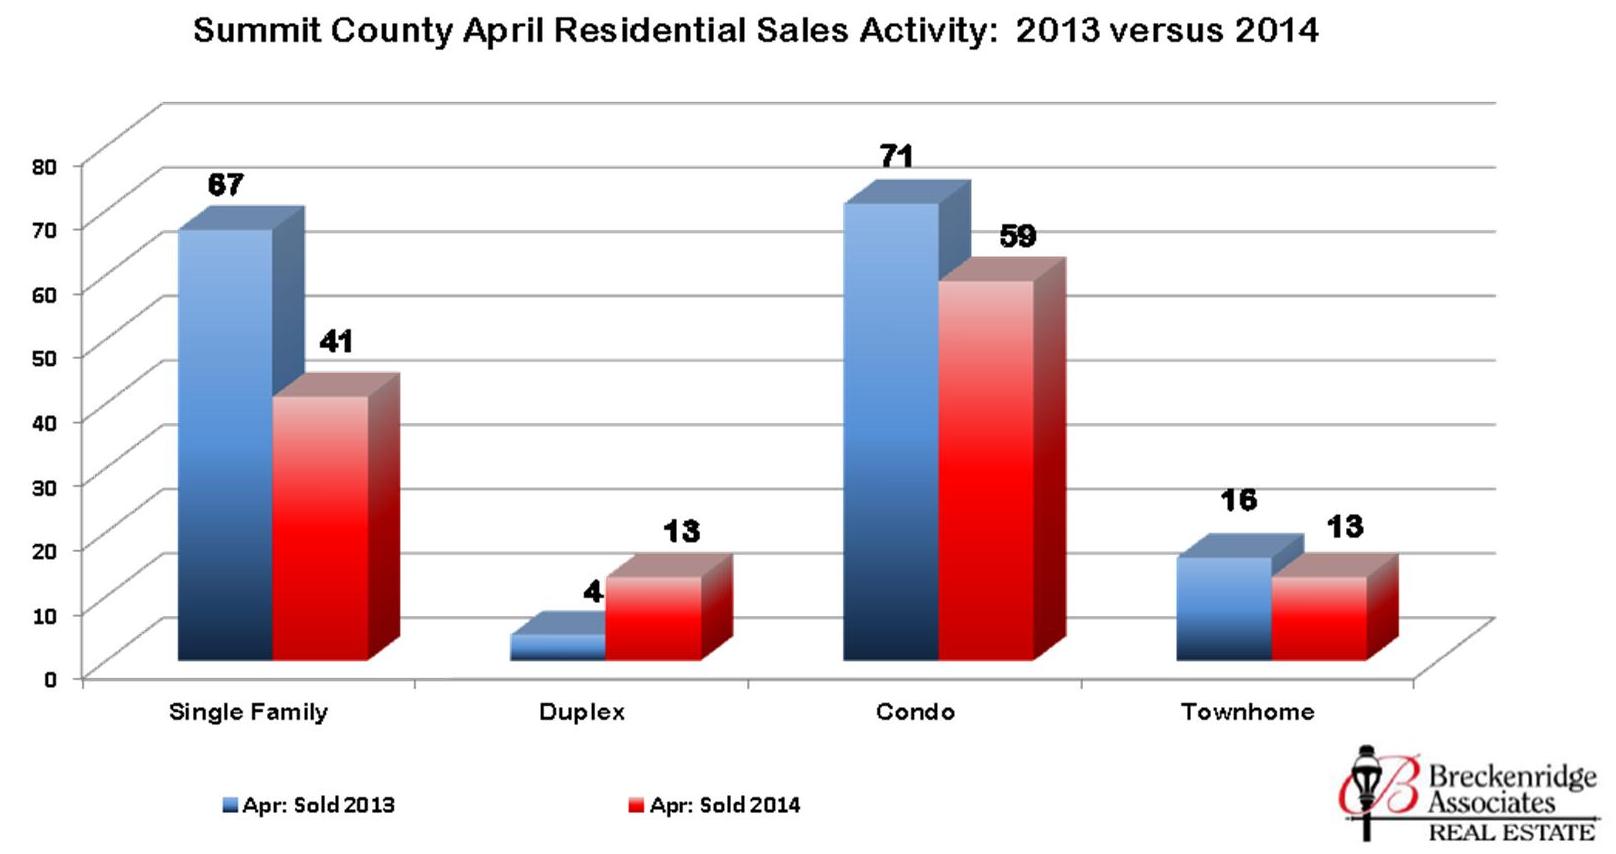 Summit County Residential Stats: April 2014